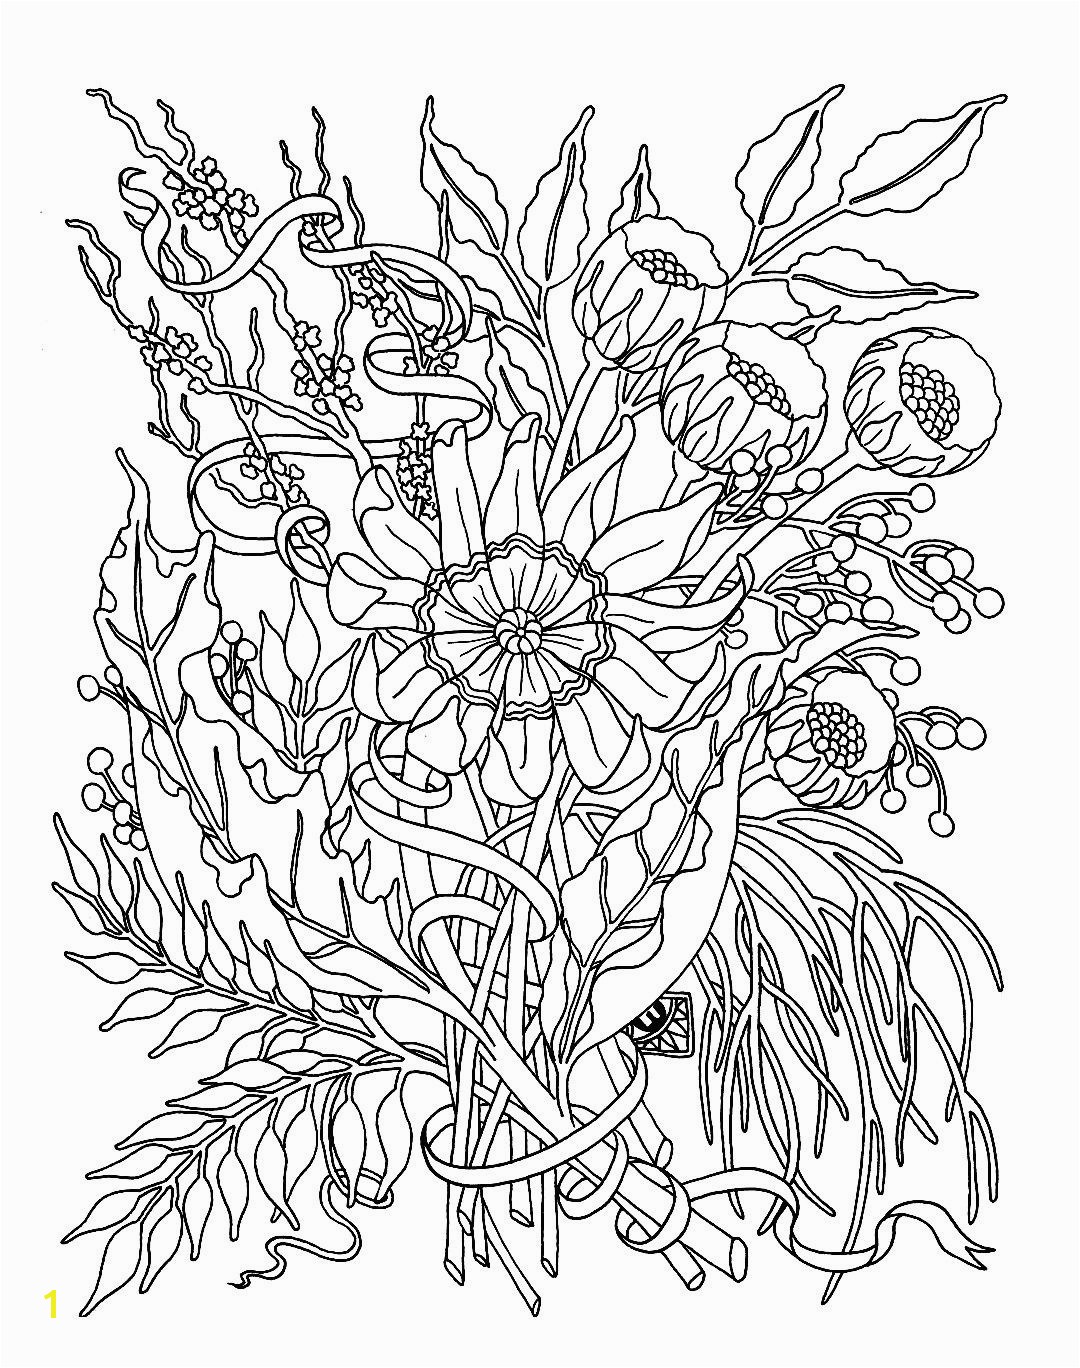 Coloring Pages for Adults Difficult Fairies Coloring Pages for Adults Difficult Fairies Collection